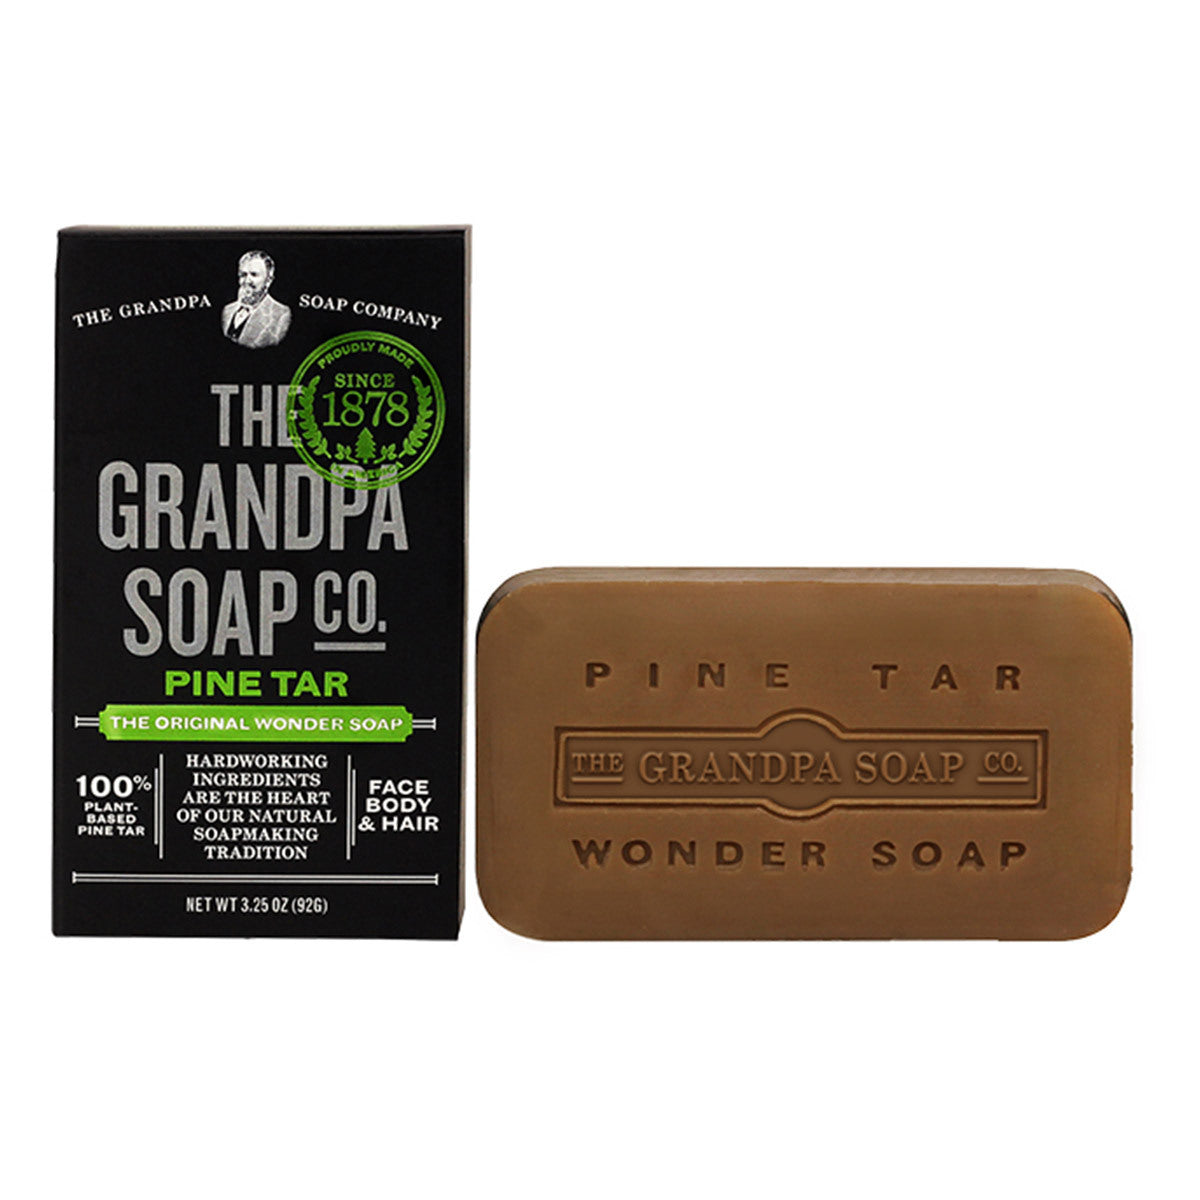 Primary image of Pine Tar Soap